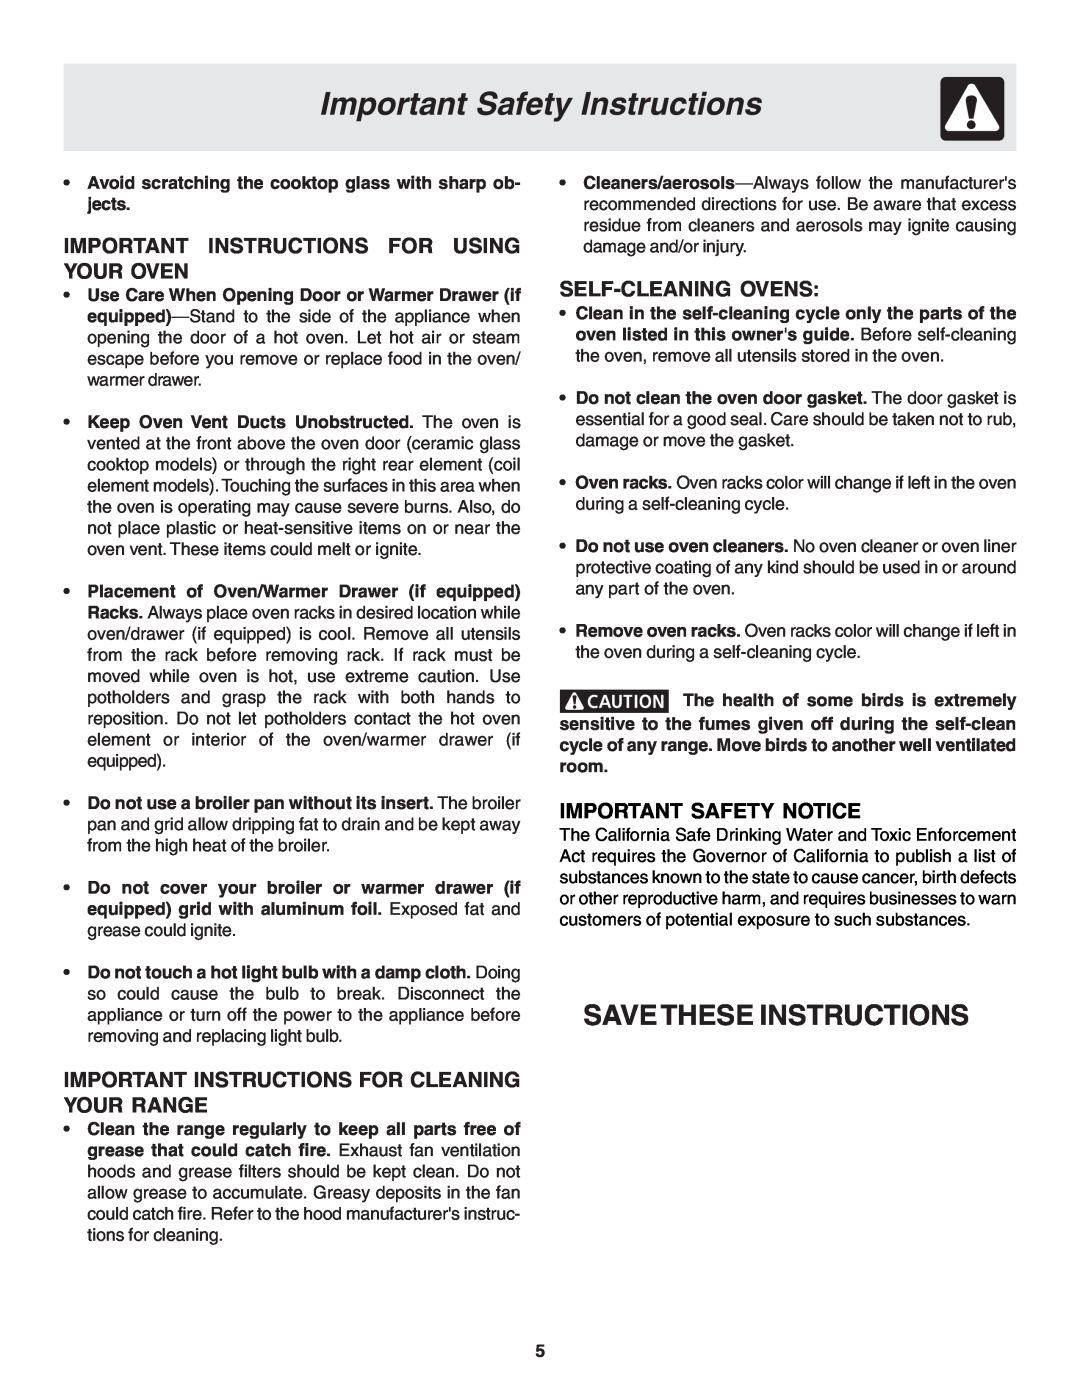 Frigidaire 318203821E warranty Savethese Instructions, Important Instructions For Using Your Oven, Self-Cleaningovens 